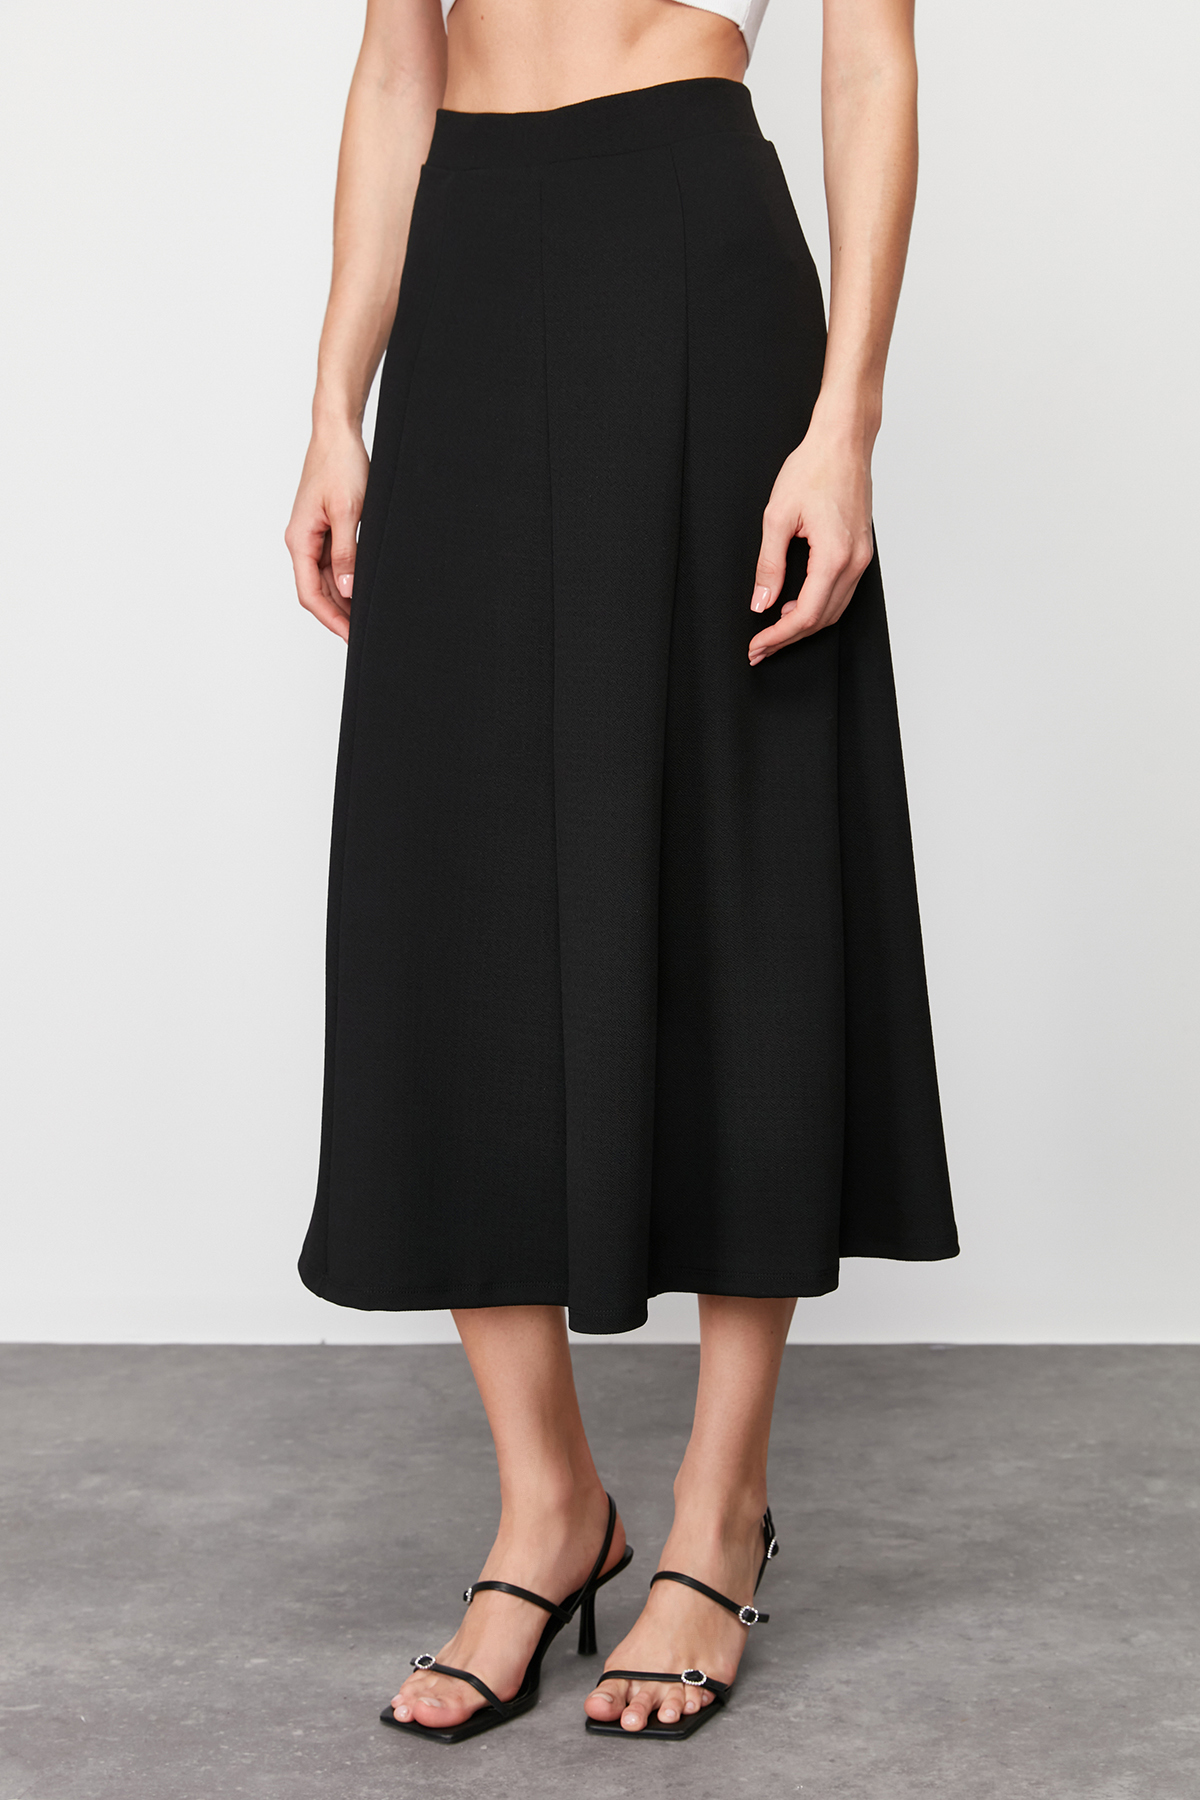 Trendyol Black Flared Maxi Stretchy Knitted Skirt